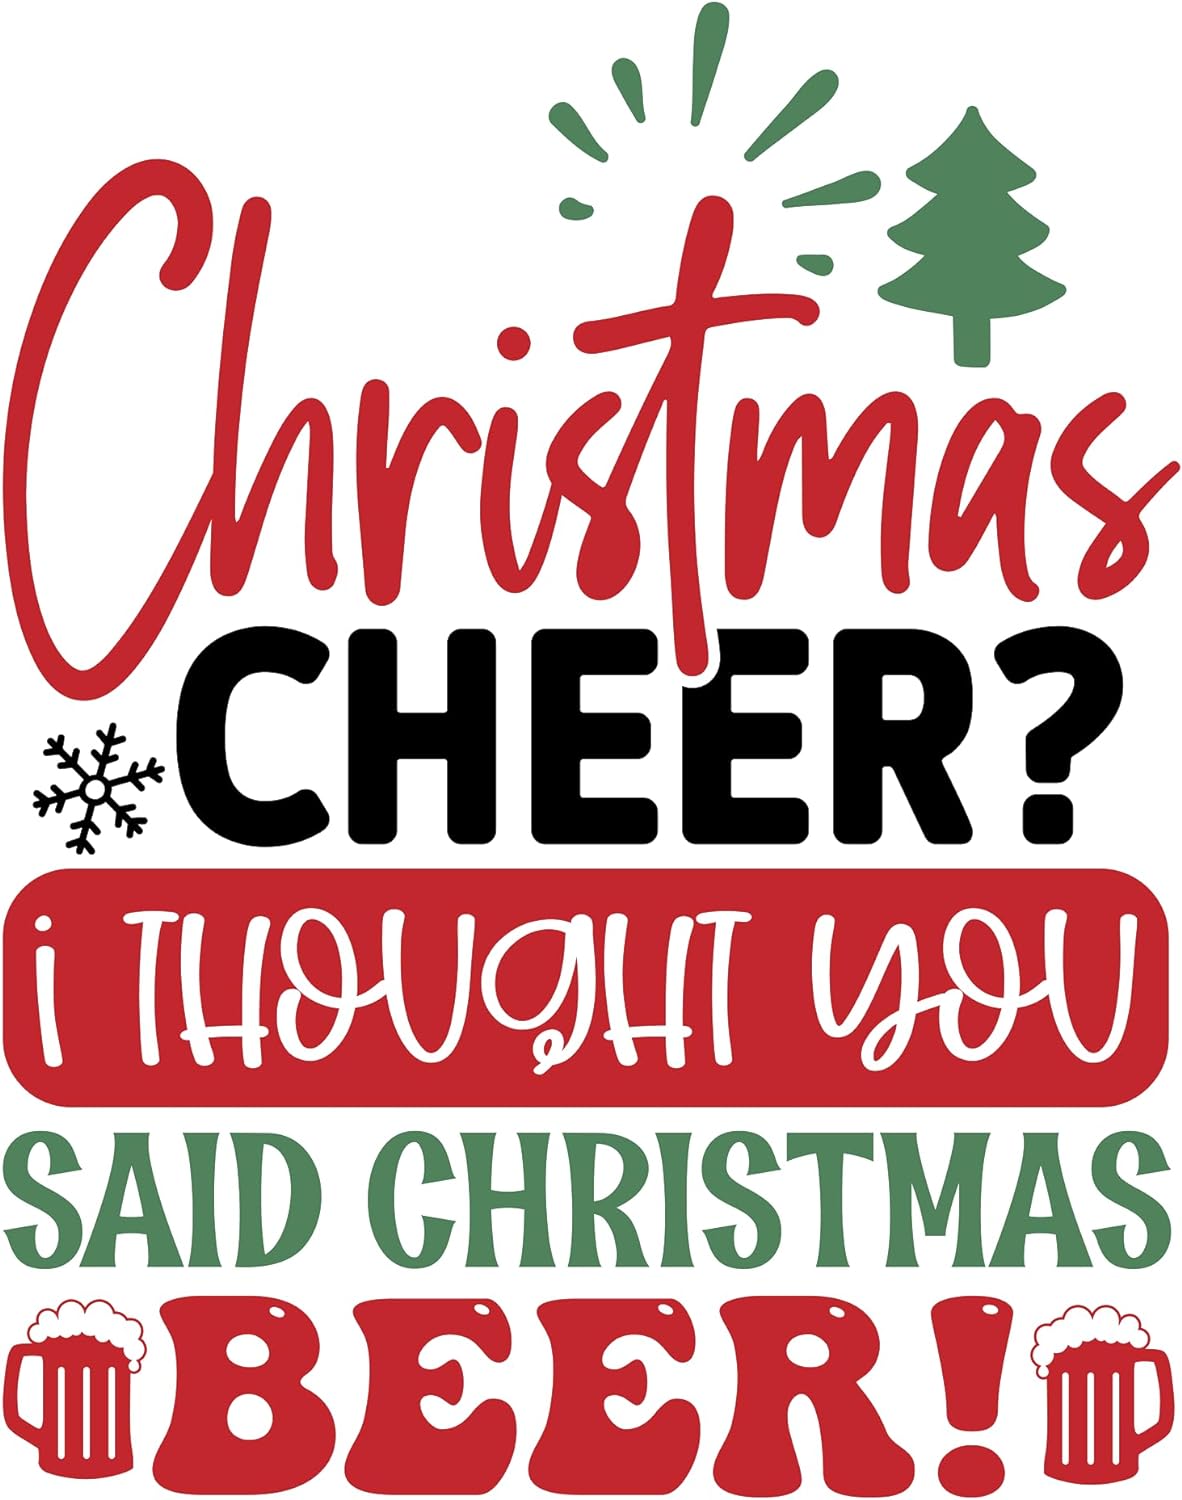 Inspirational Quote Christmas Cheer I Thought You Said Christmas Beer! Motivational Sticker Vinyl Decal Motivation Stickers- 5" Vinyl Sticker Waterproof